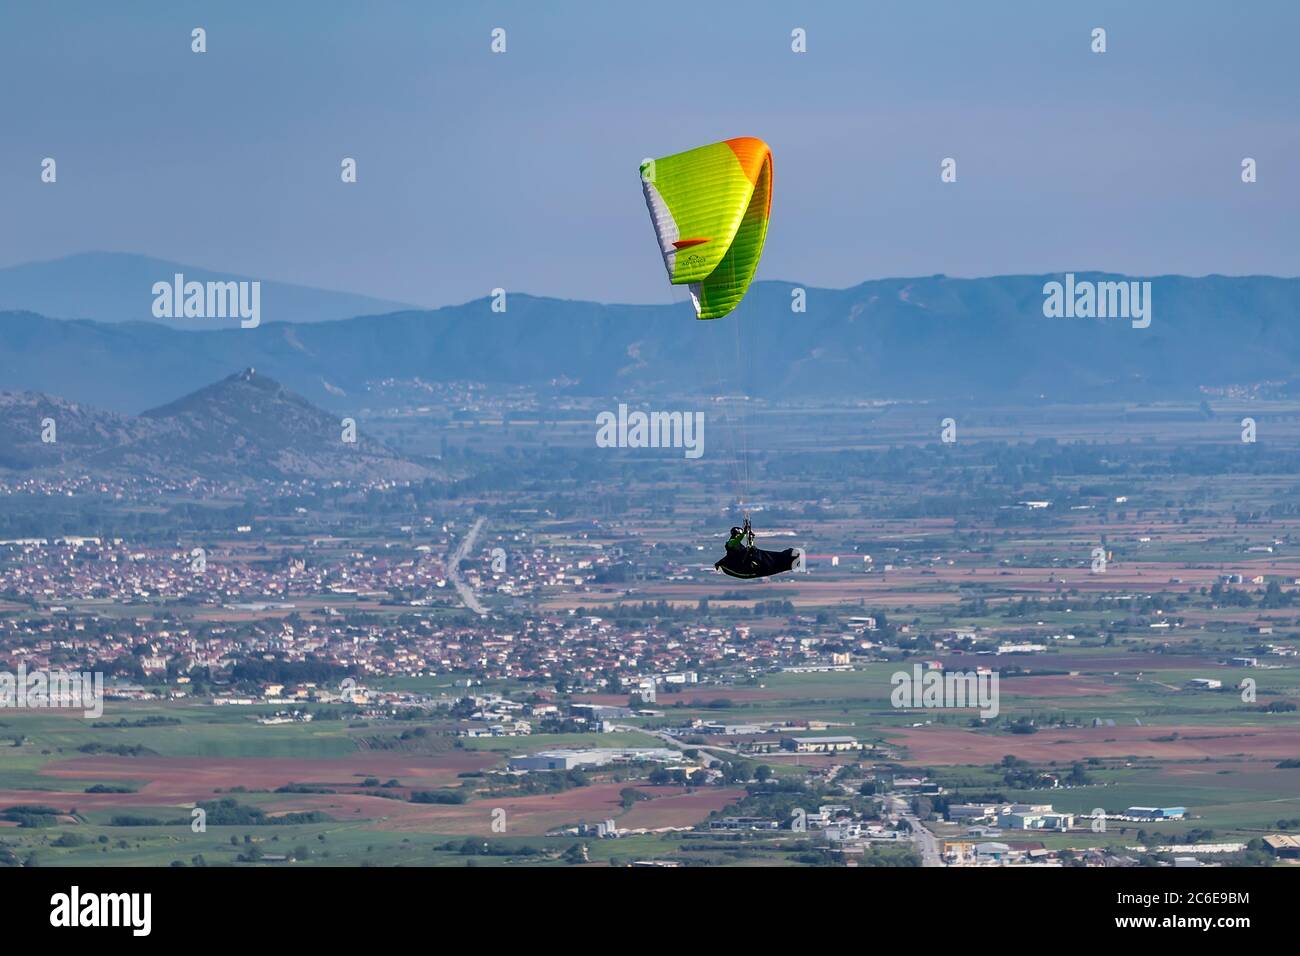 Drama, Greece -  May 5, 2020: Paraglider in the popular area for parachuting on the side of Korylovos in Drama Stock Photo